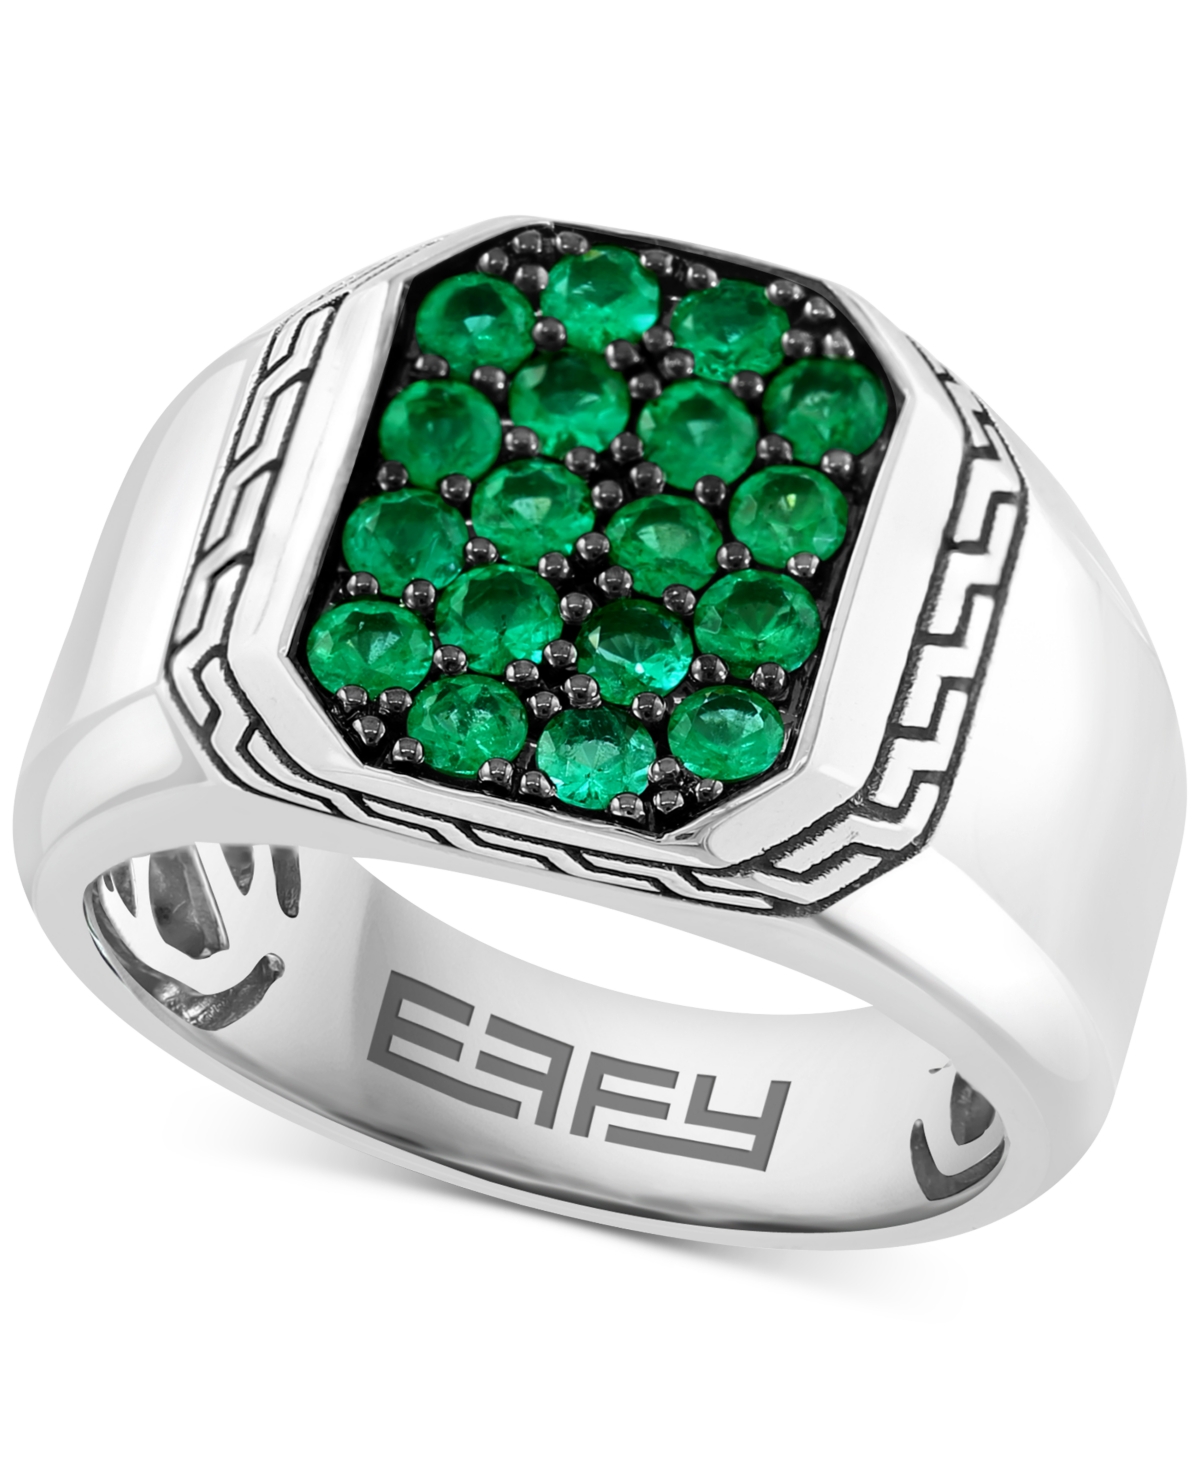 Effy Men's Emerald (3/4 ct. t.w.) Cluster Ring in Sterling Silver - Sterling Silver